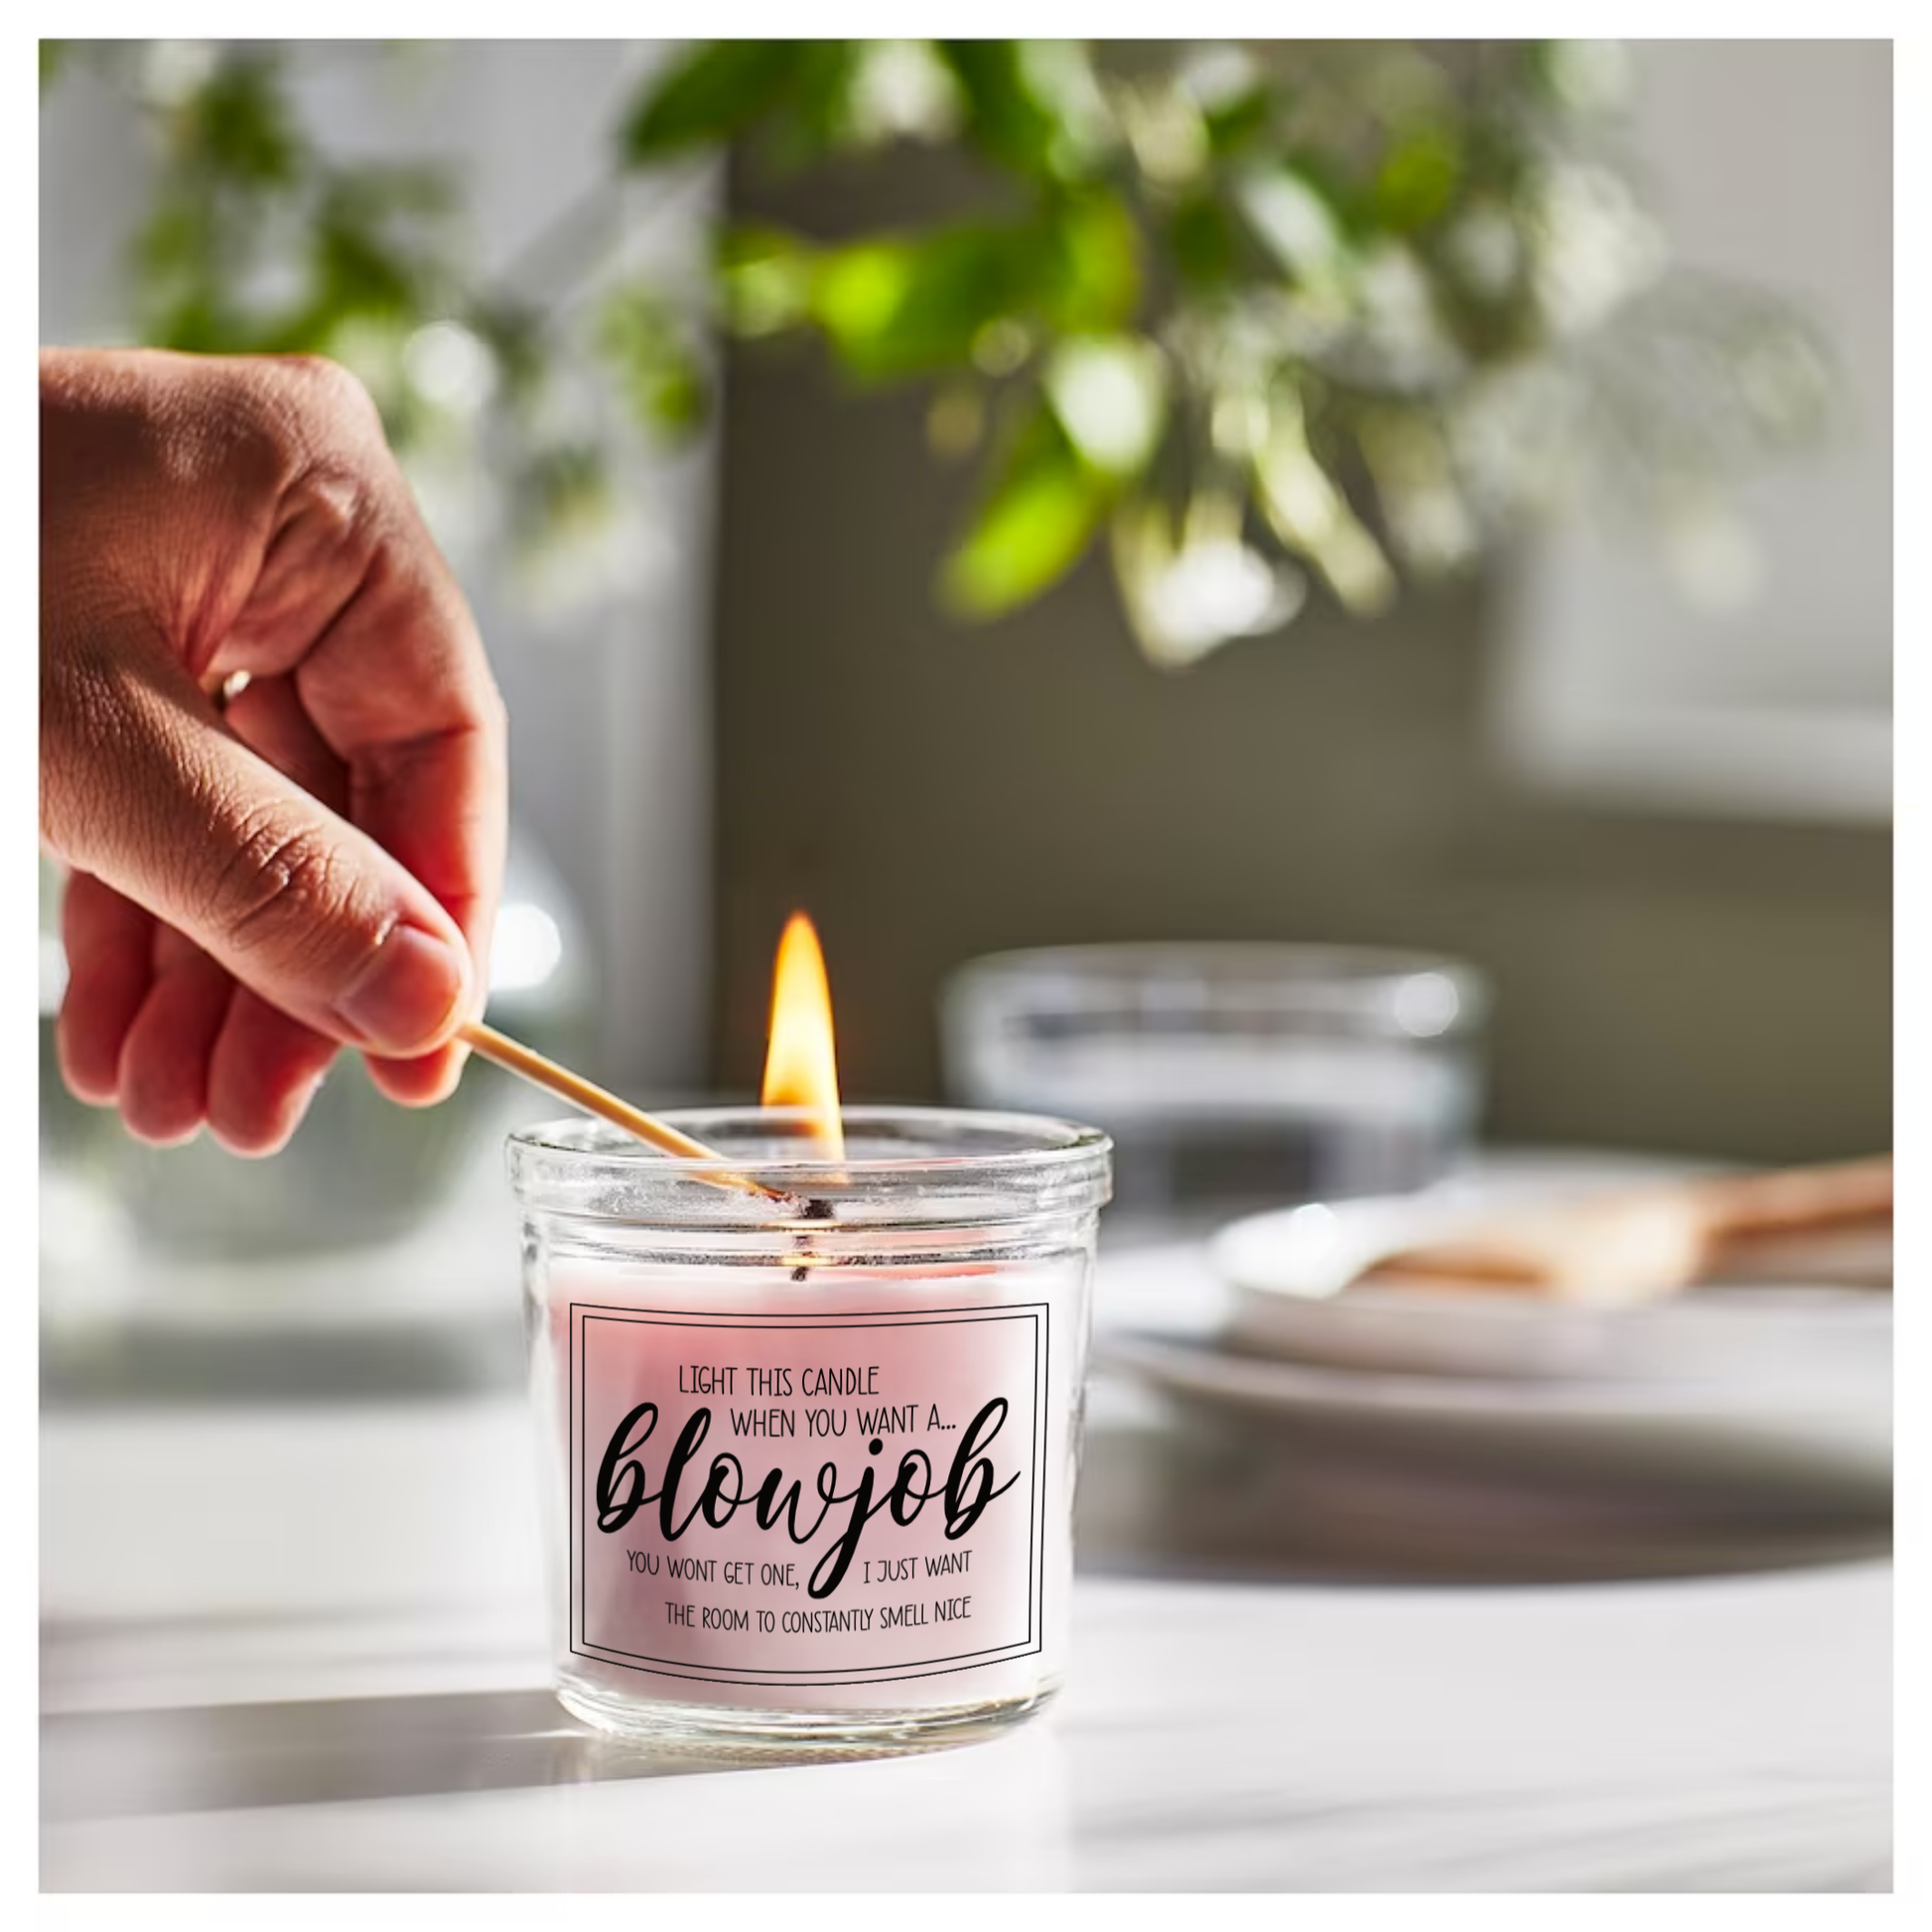 Glass jar candle with pink wax. Clear label to the front features a funny quote which reads 'light this candle when you want a blowjob. You won't get one, i just want the room to constantly smell nice'. 